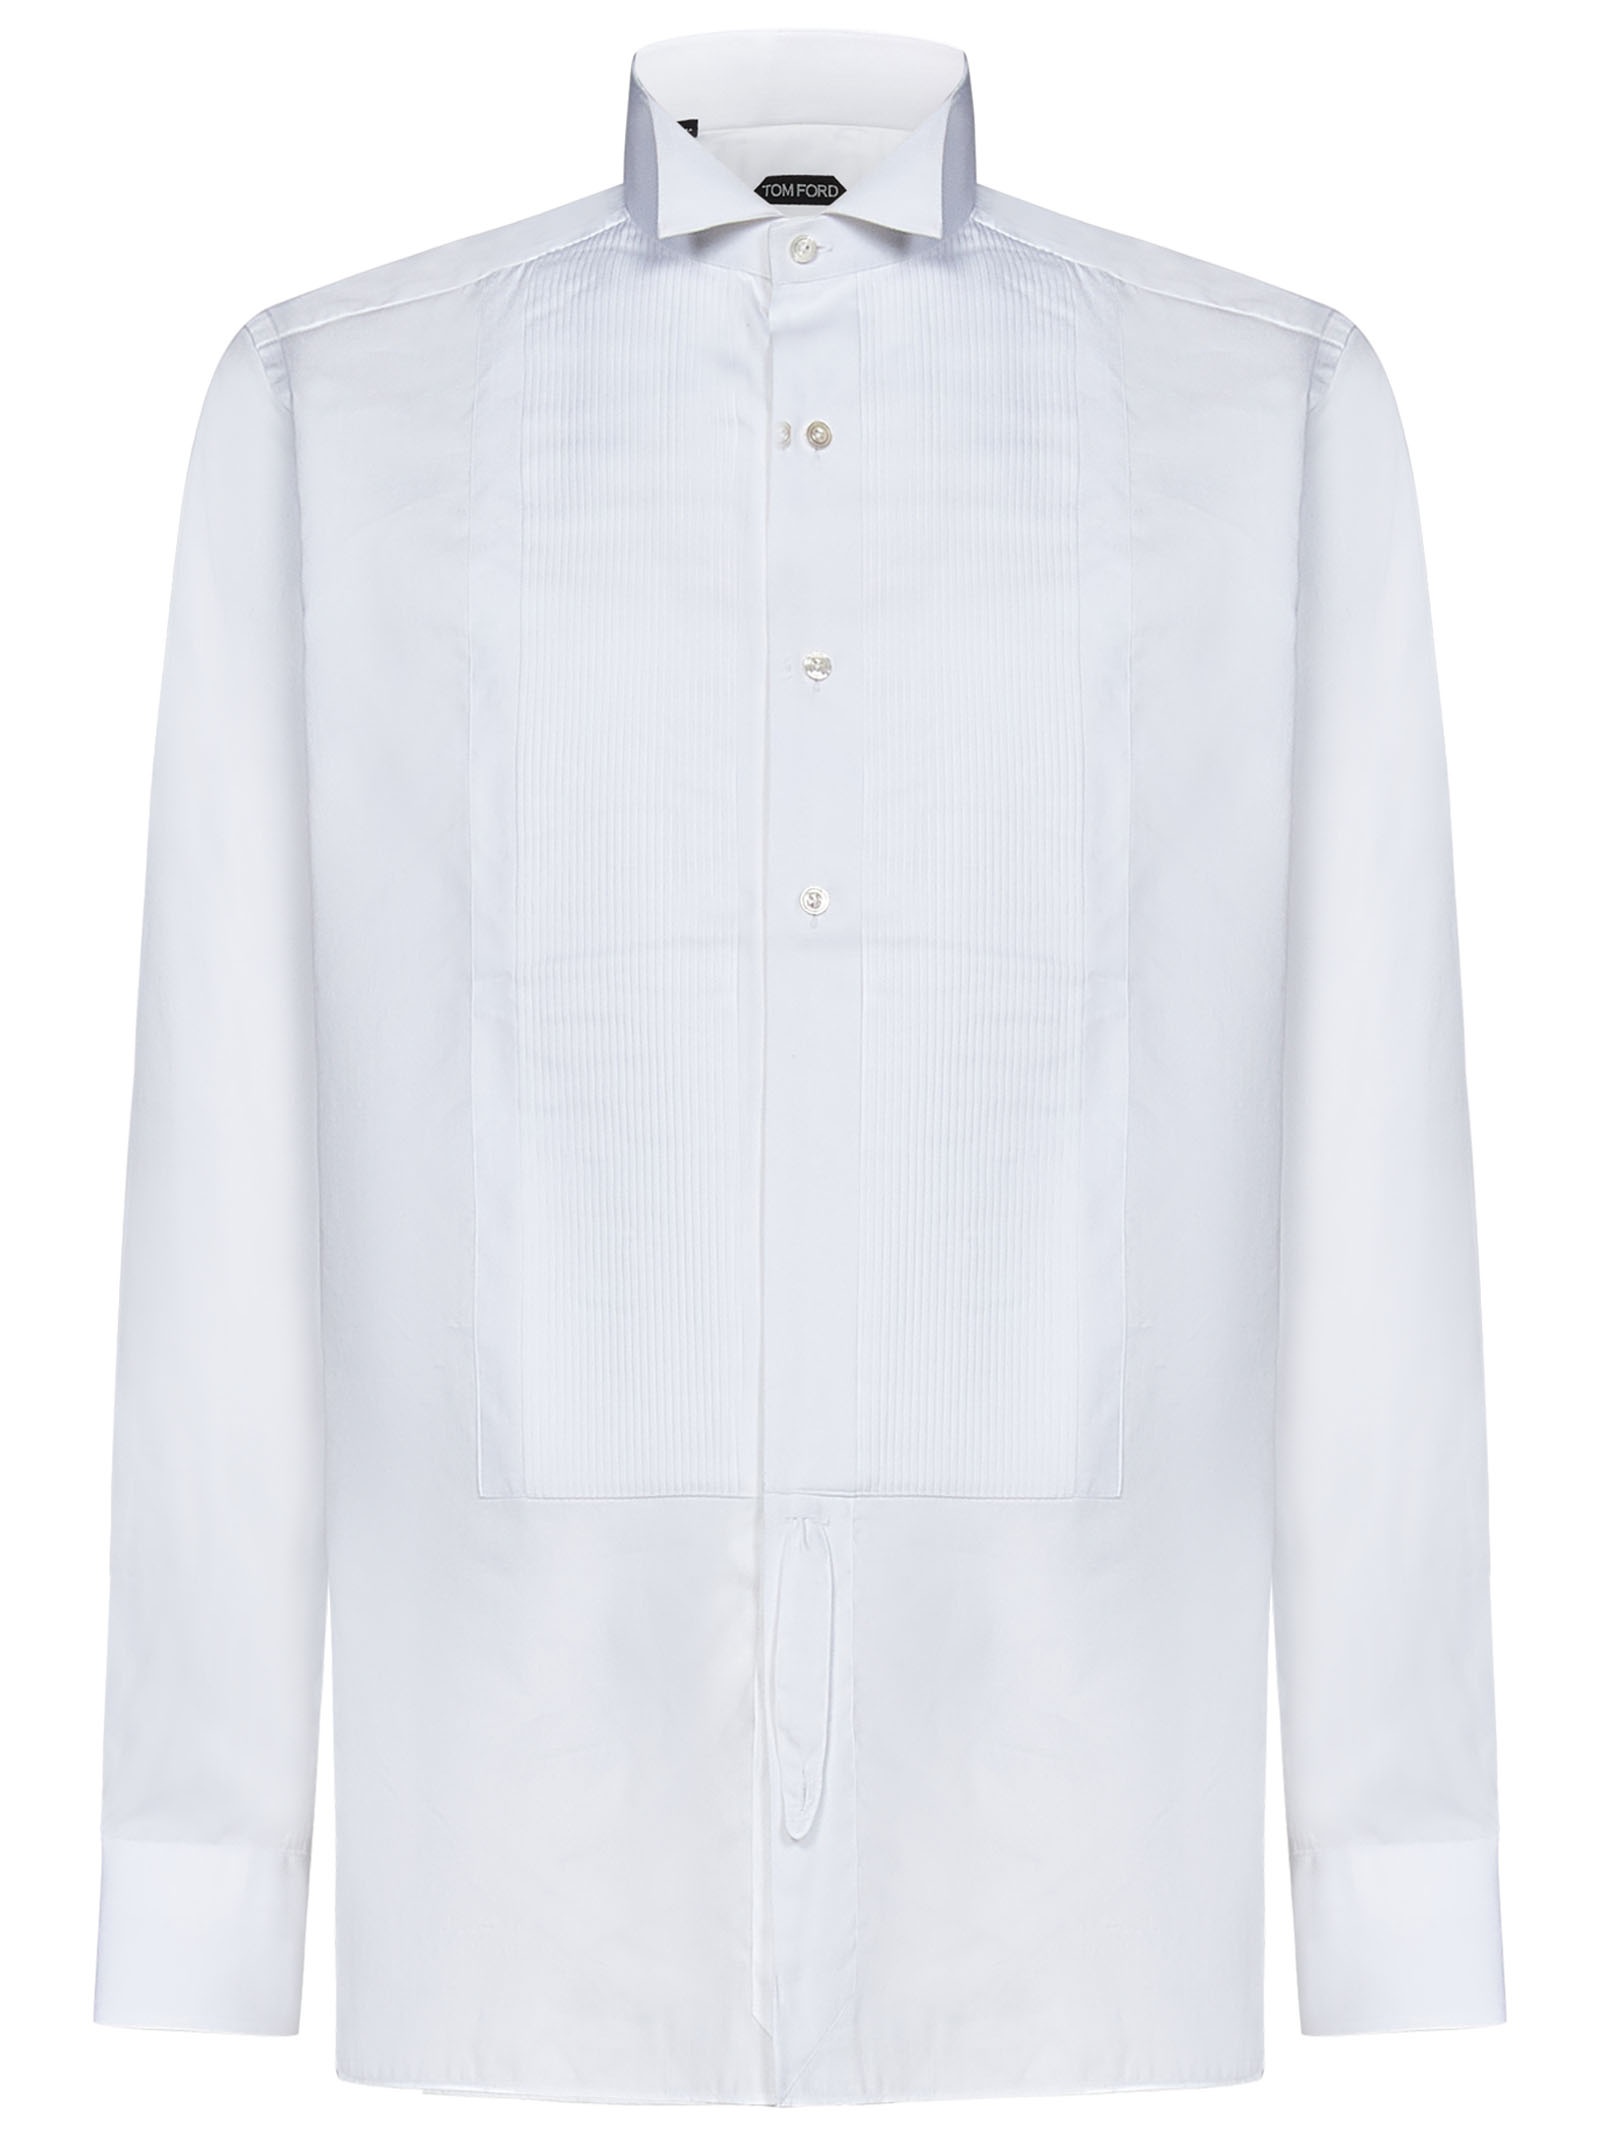 Optical white cotton and silk tuxedo shirt with pleated plastron and wing collar. - 1